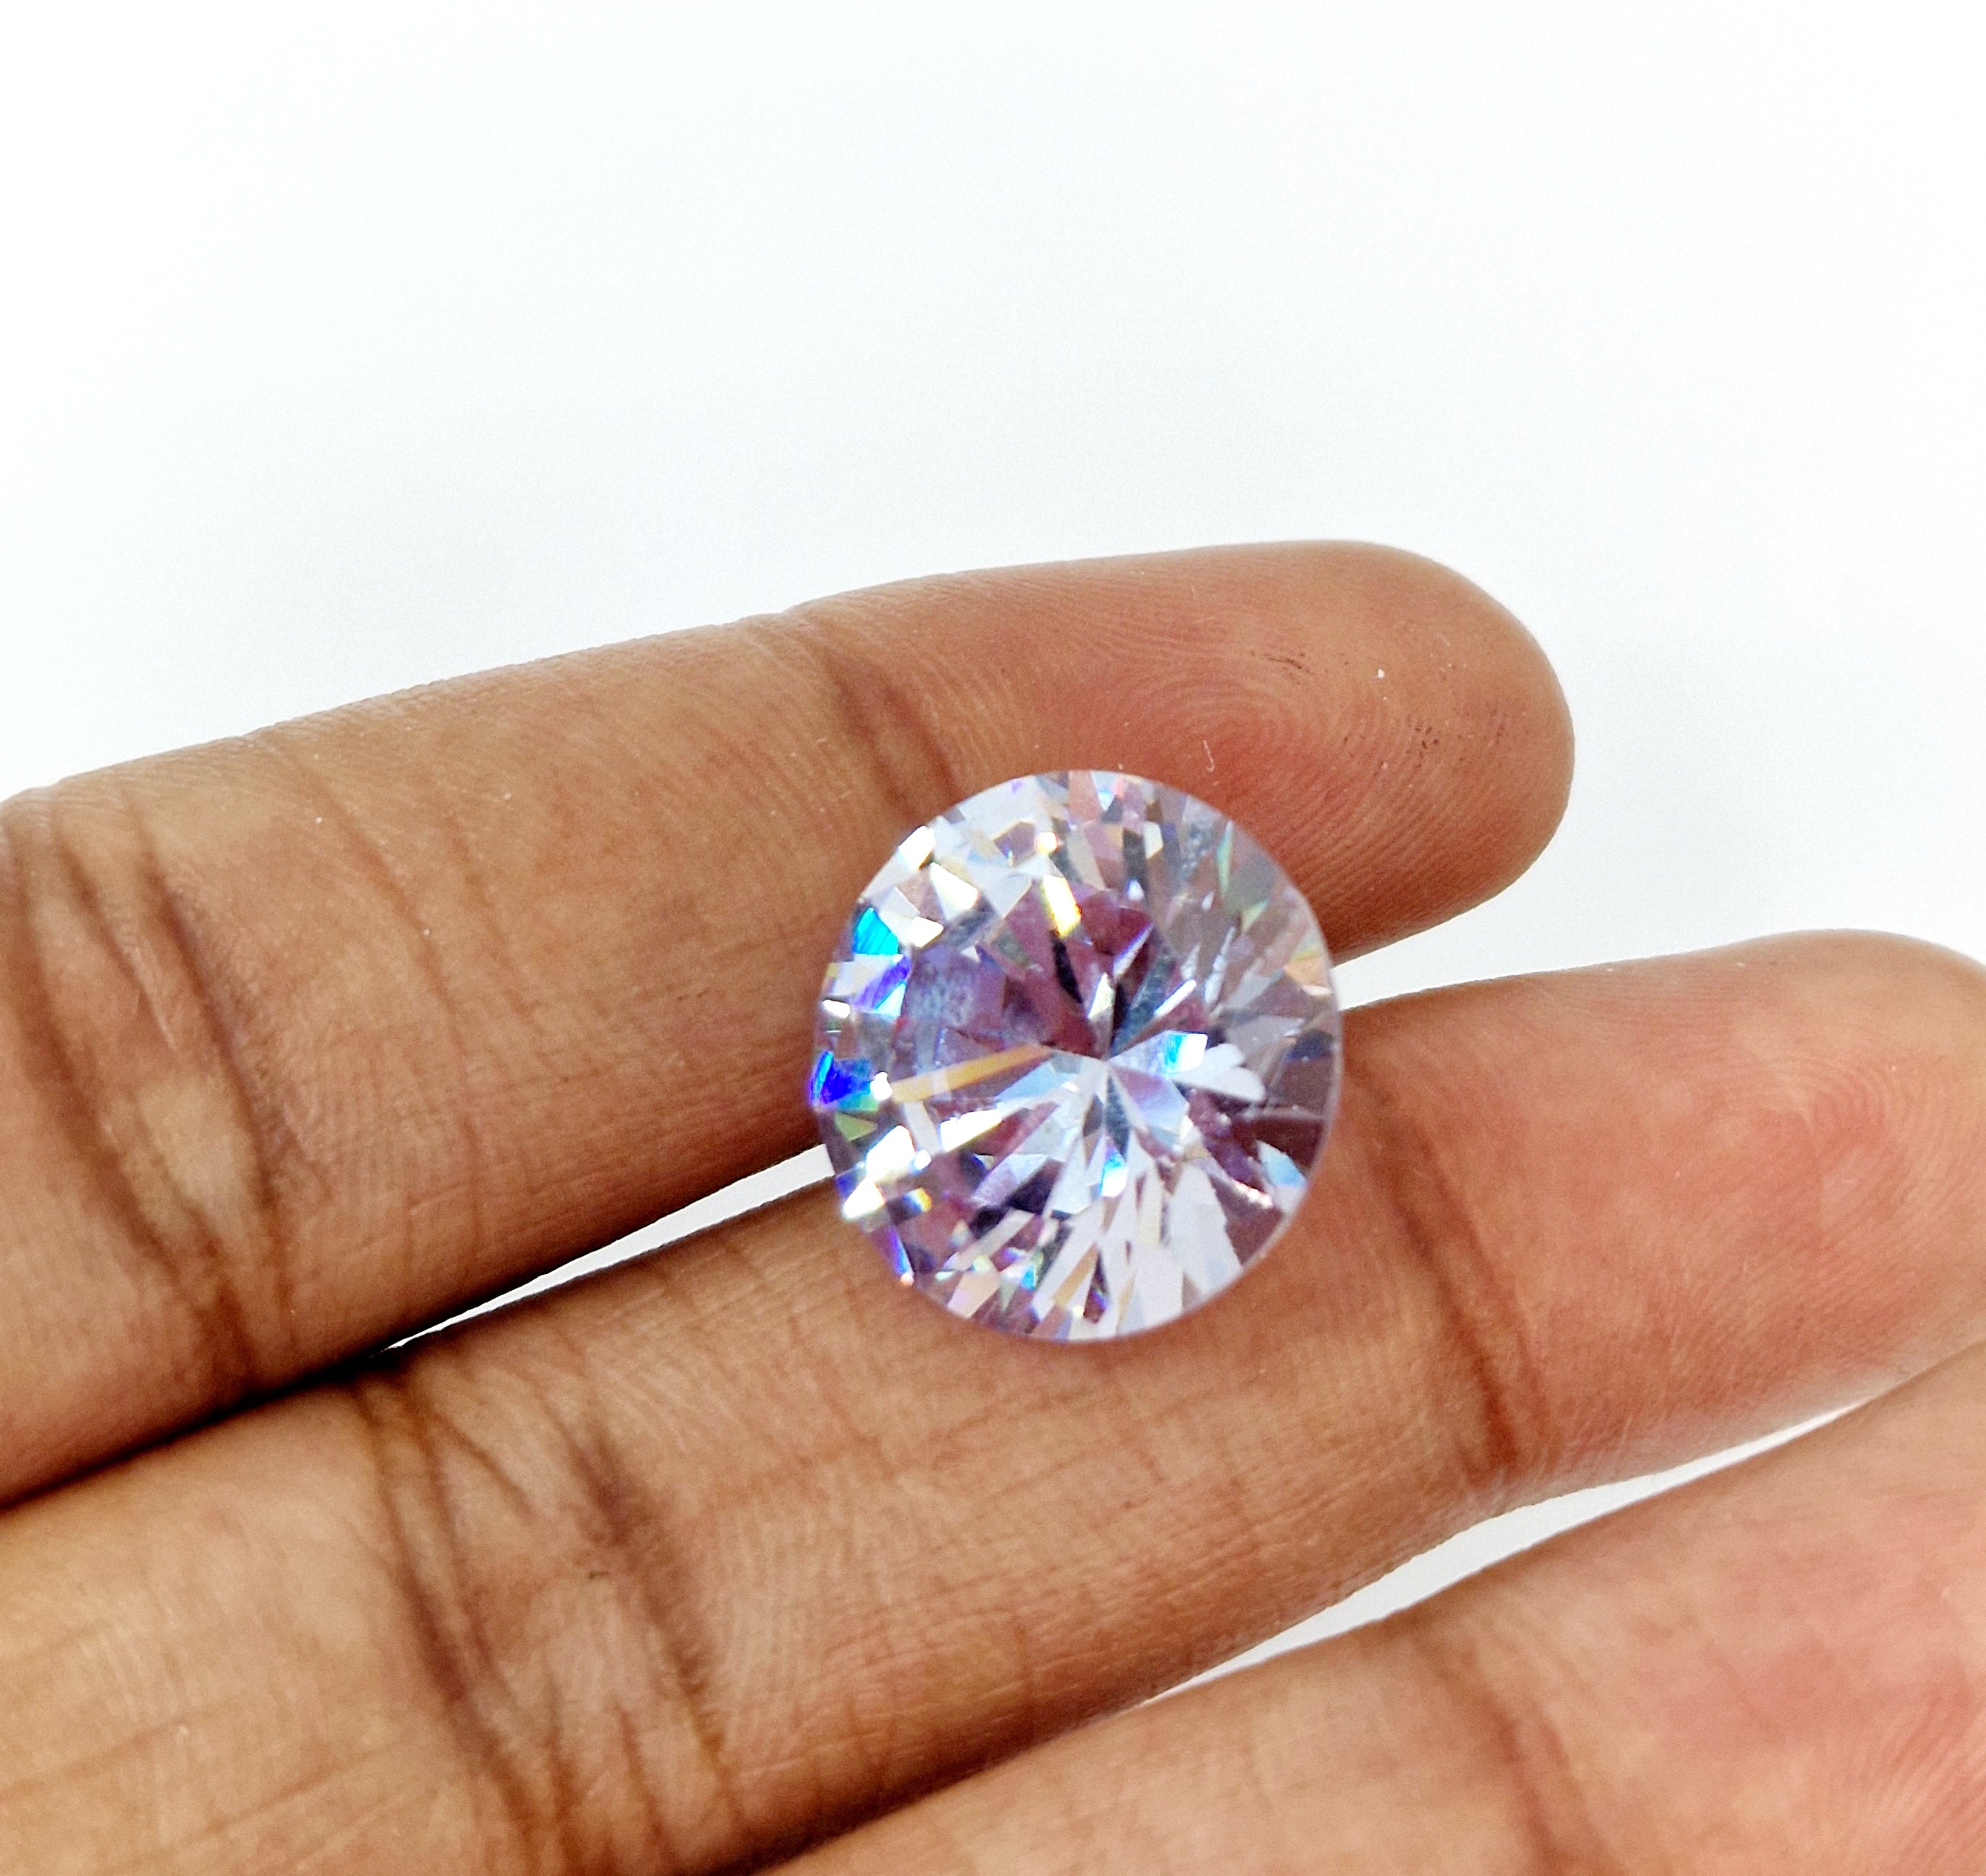 MajorCrafts 2pcs 16mm AAAAA (5A) Crystal Clear Round Point Back Cubic Zirconia Stones